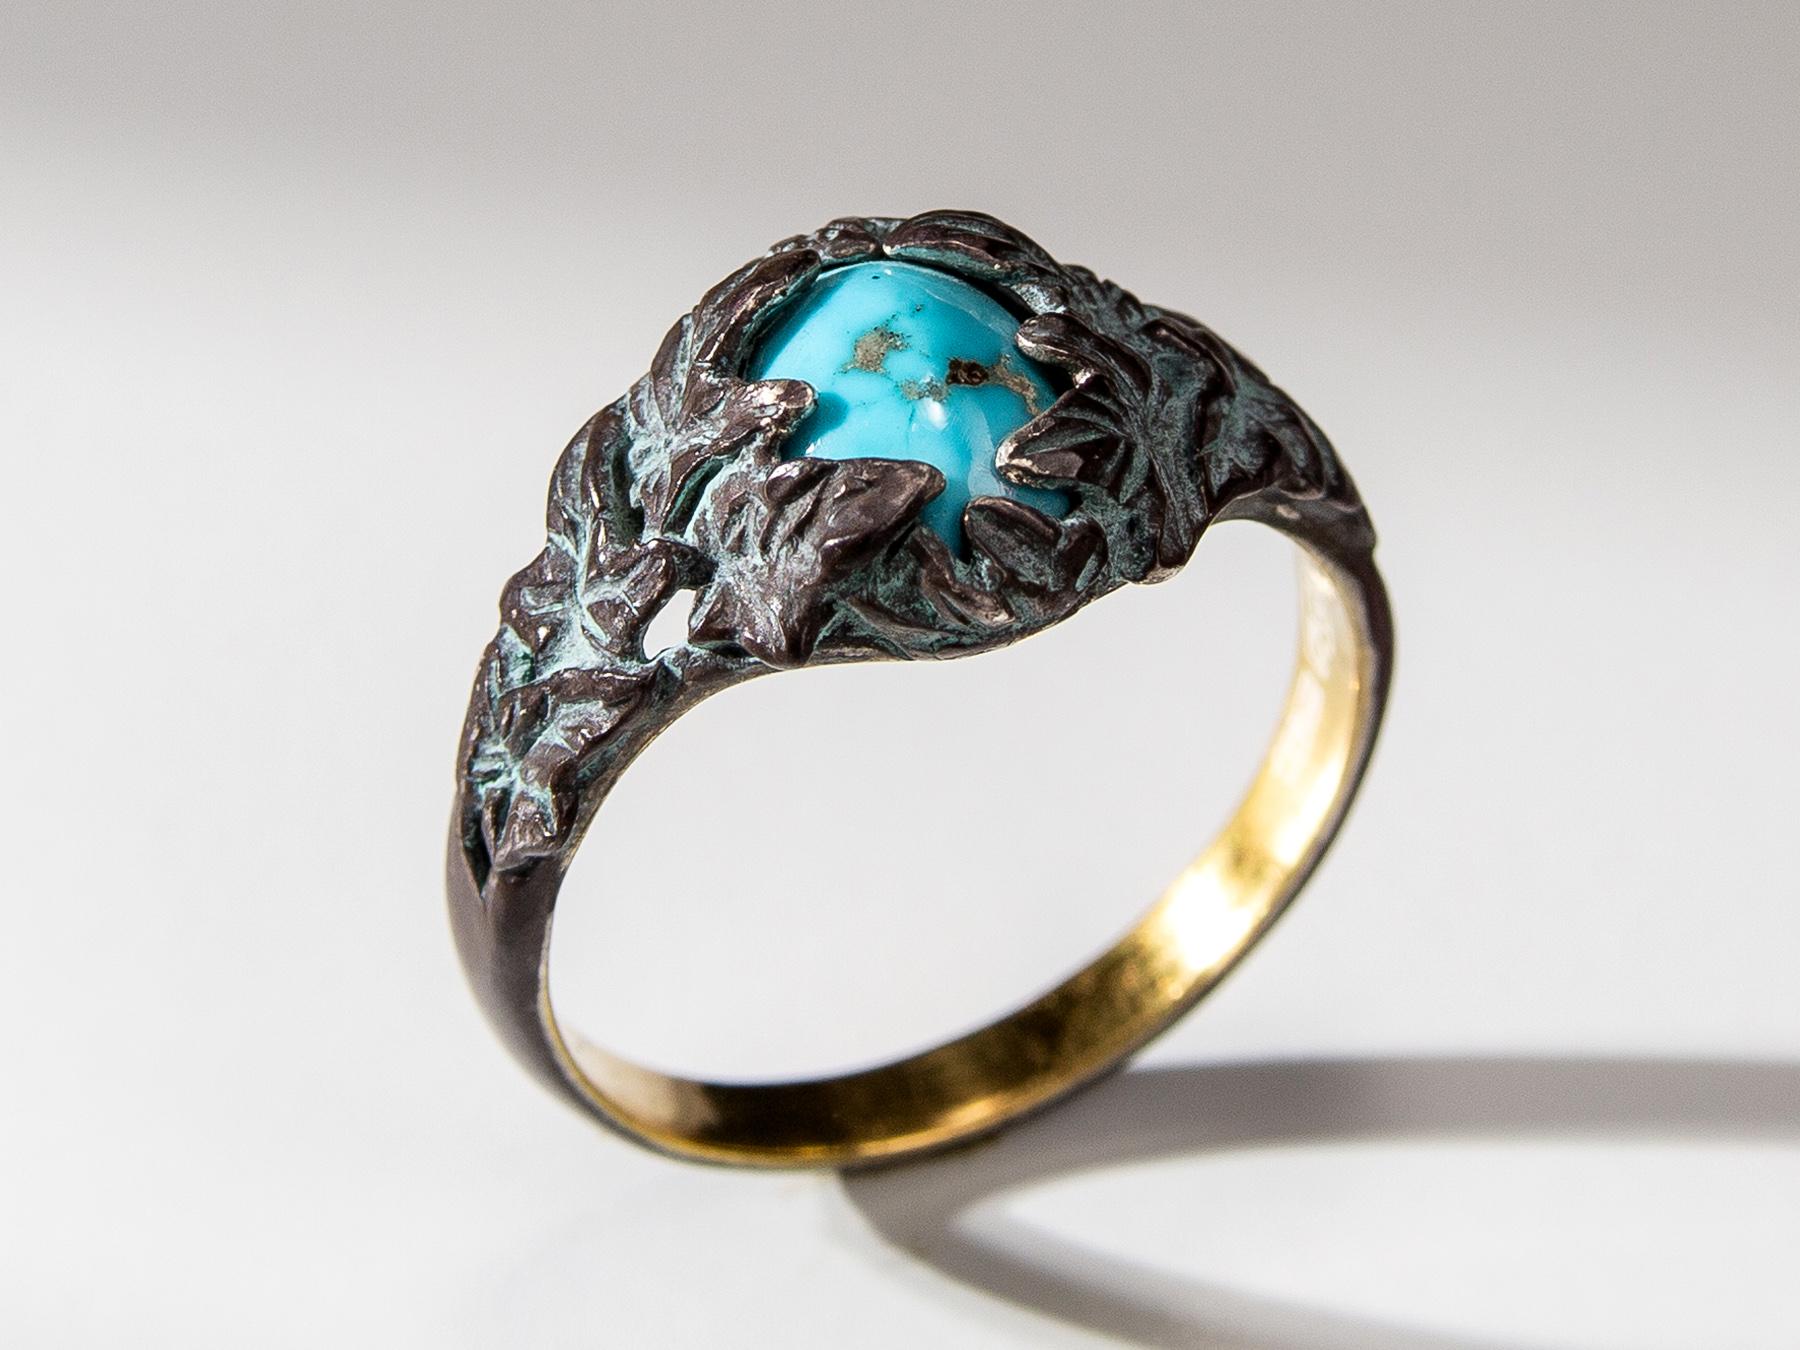 Antic style patinated and gold plated silver ring 
with natural cabochon-cut Turquoise
turquoise measurements - 0.079 х 0.2 х 0.35 in
turquoise weight - 1.5 carat
ring weight - 3.2 grams
ring size - 7.75 US (this ring may be resized, please contact